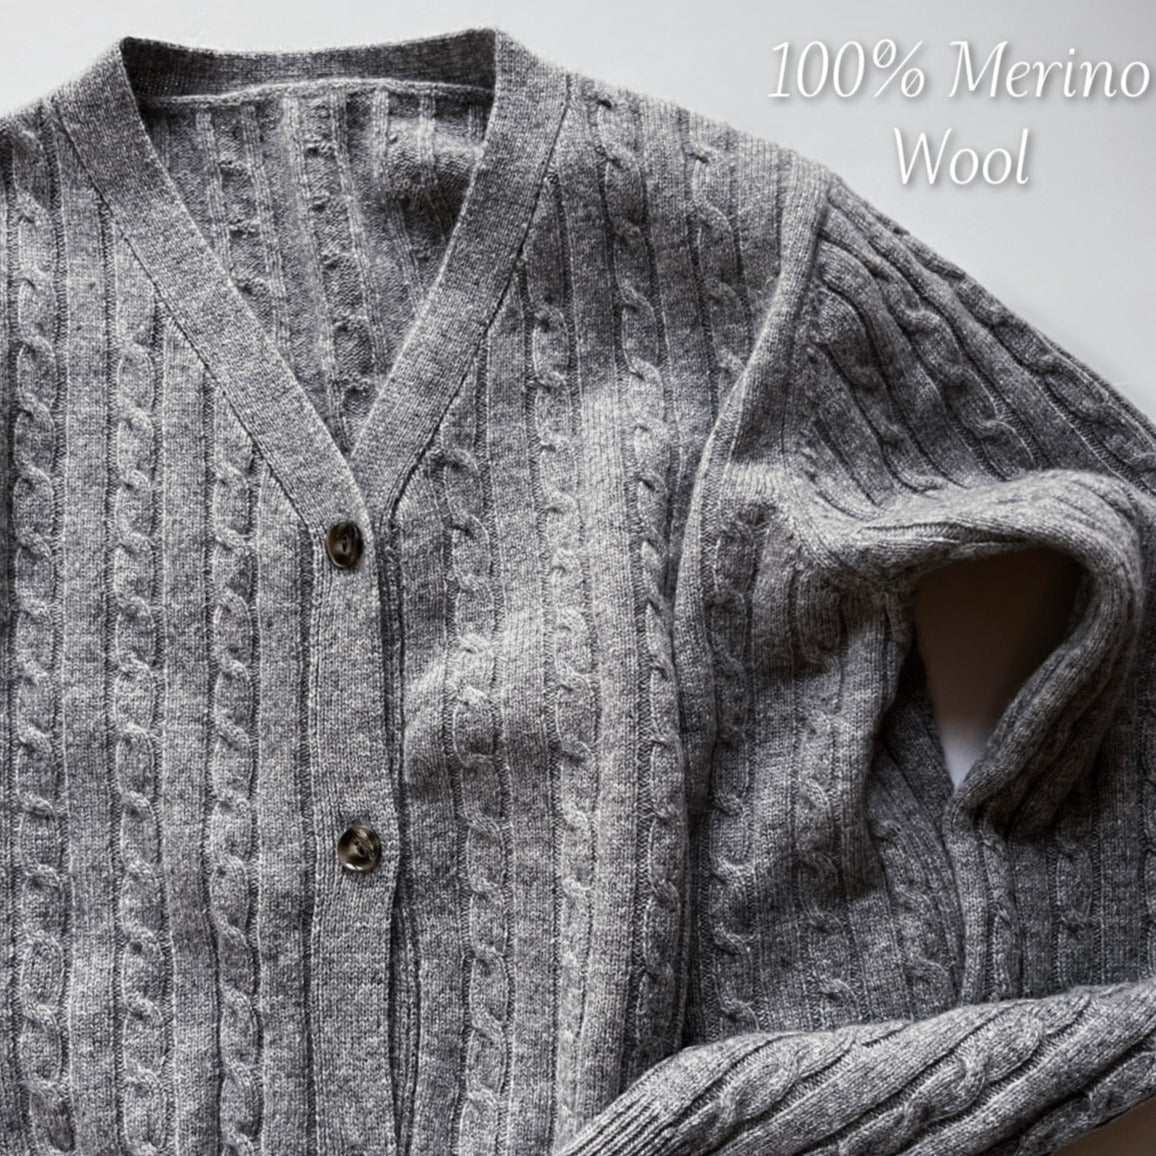 The cardigan's grey hue is versatile, easily paired with a variety of outfits, and the additional swatches indicate it may be available in other rich colors such as blue, white, and darker shades, providing options to suit every wardrobe.